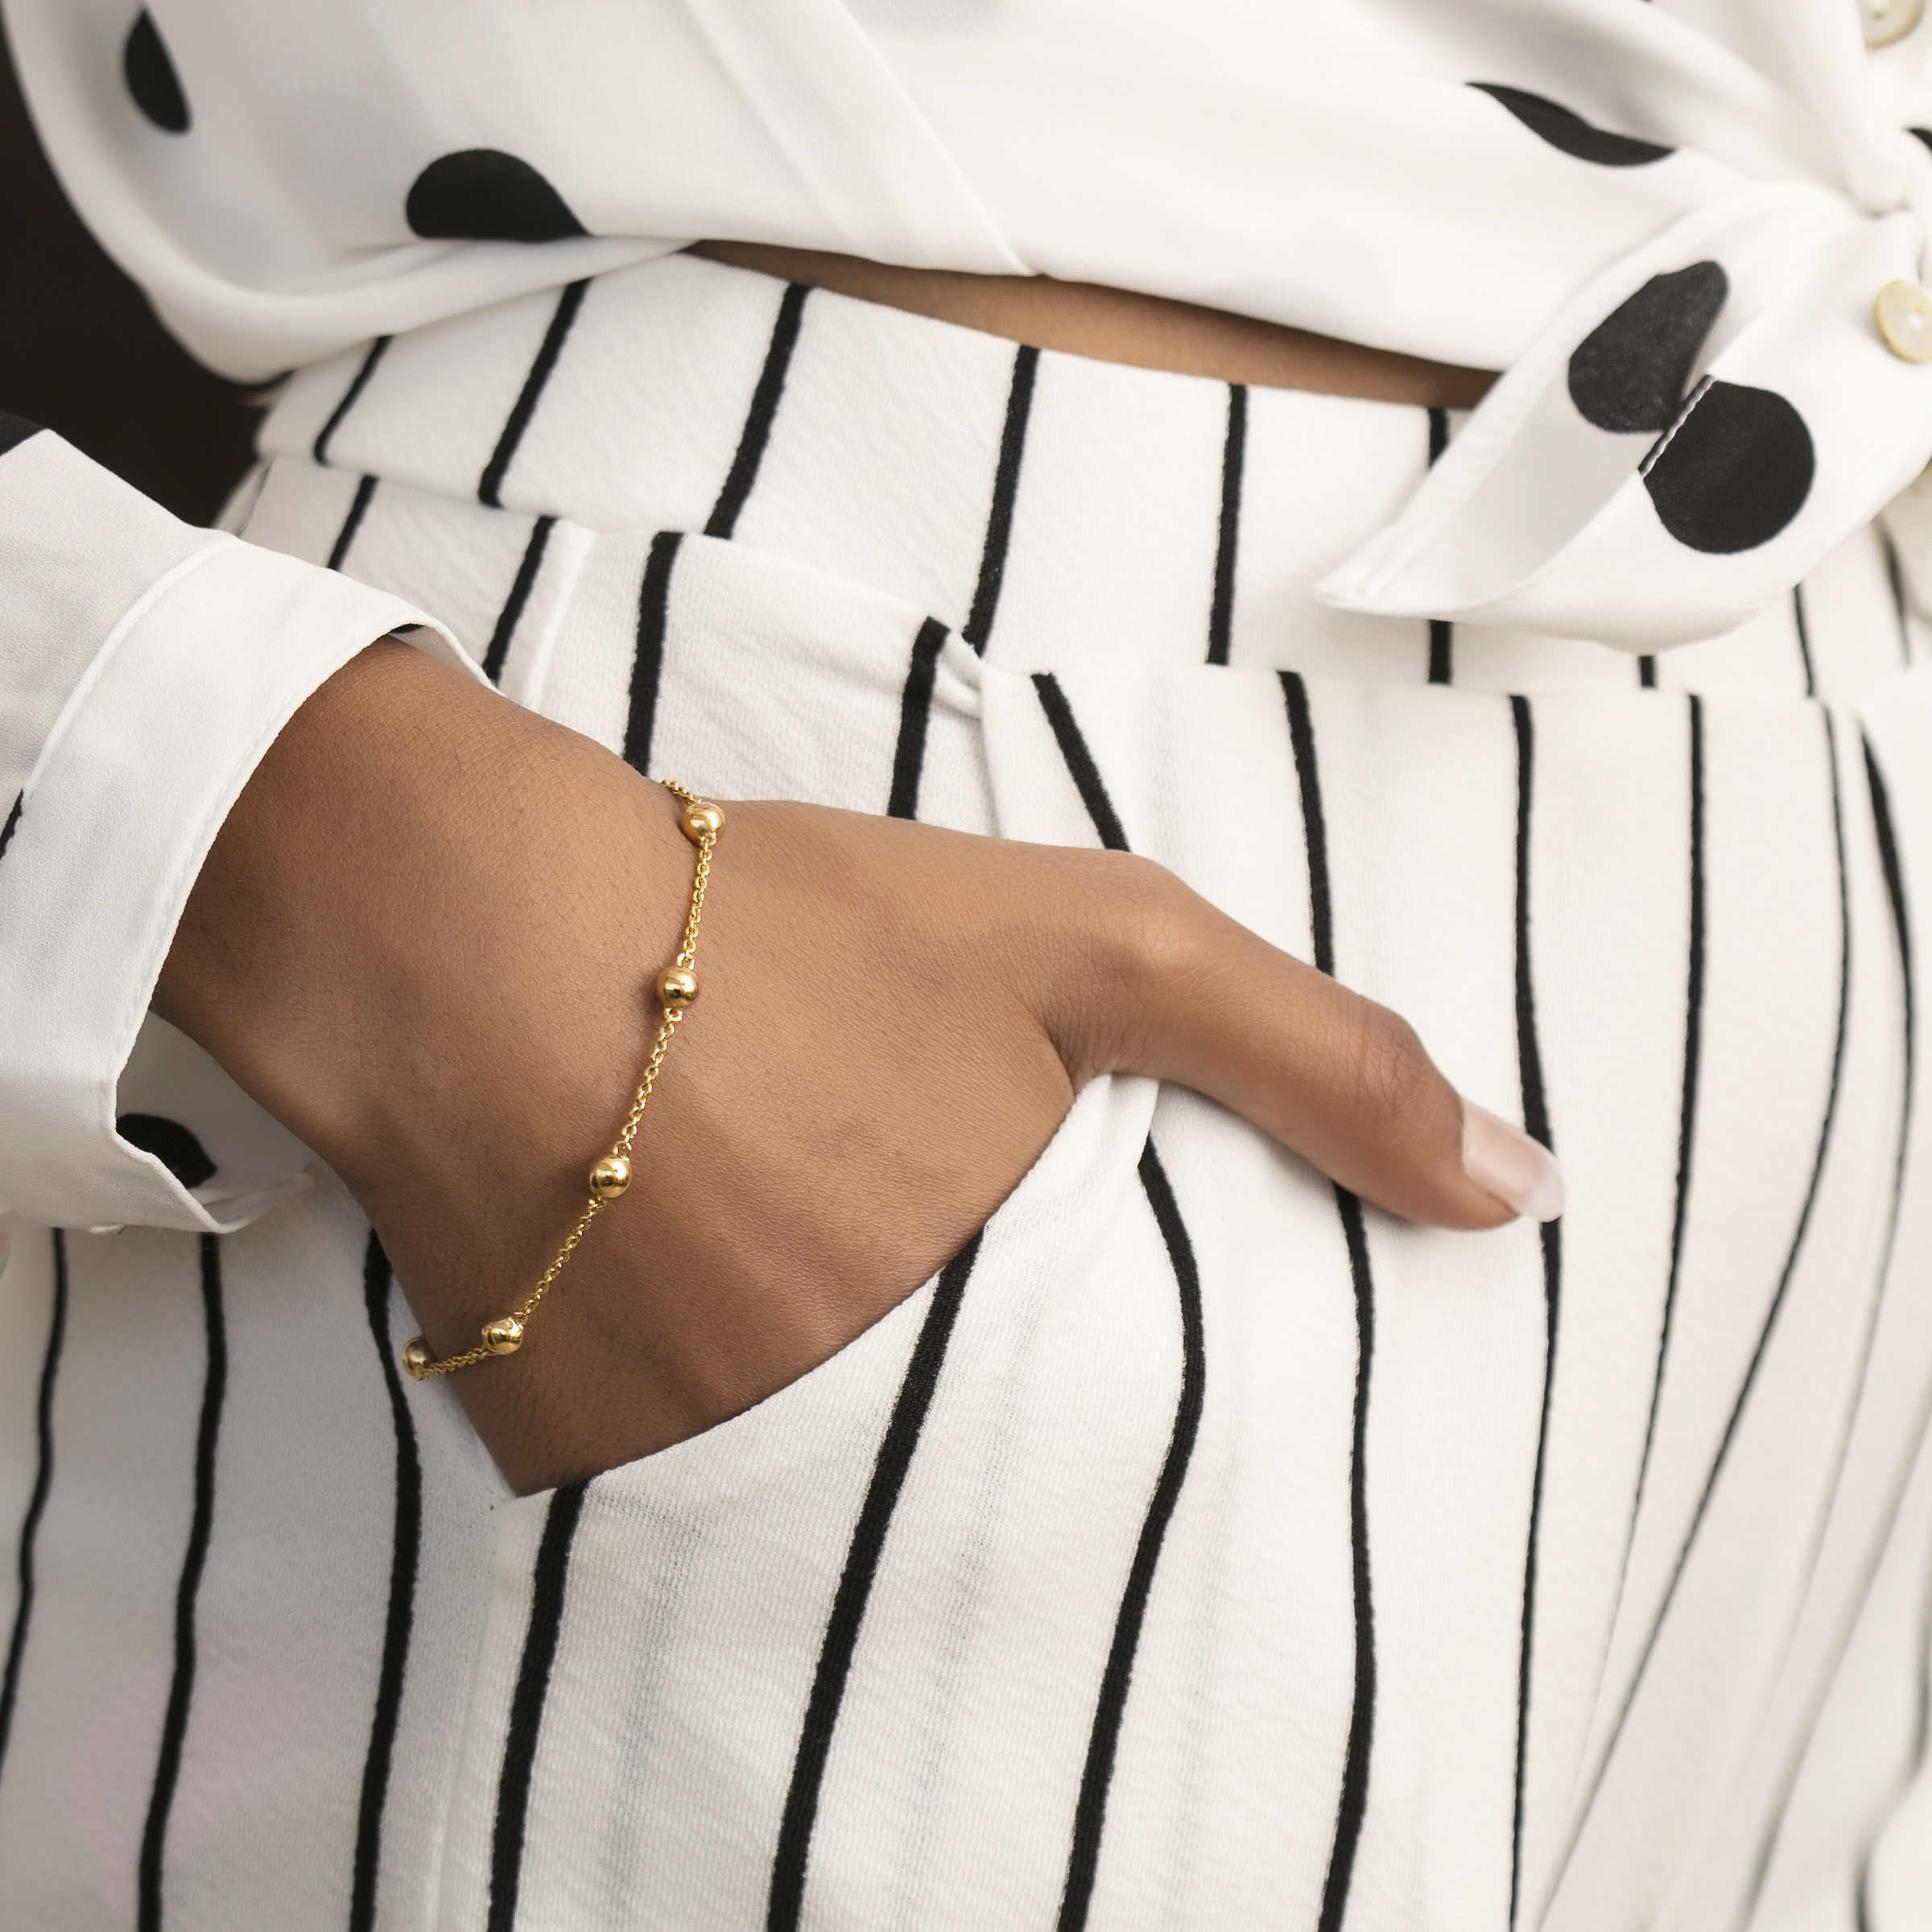 10 Back-to-Work Jewellery Options! #Top10 - Now And How By Melorra